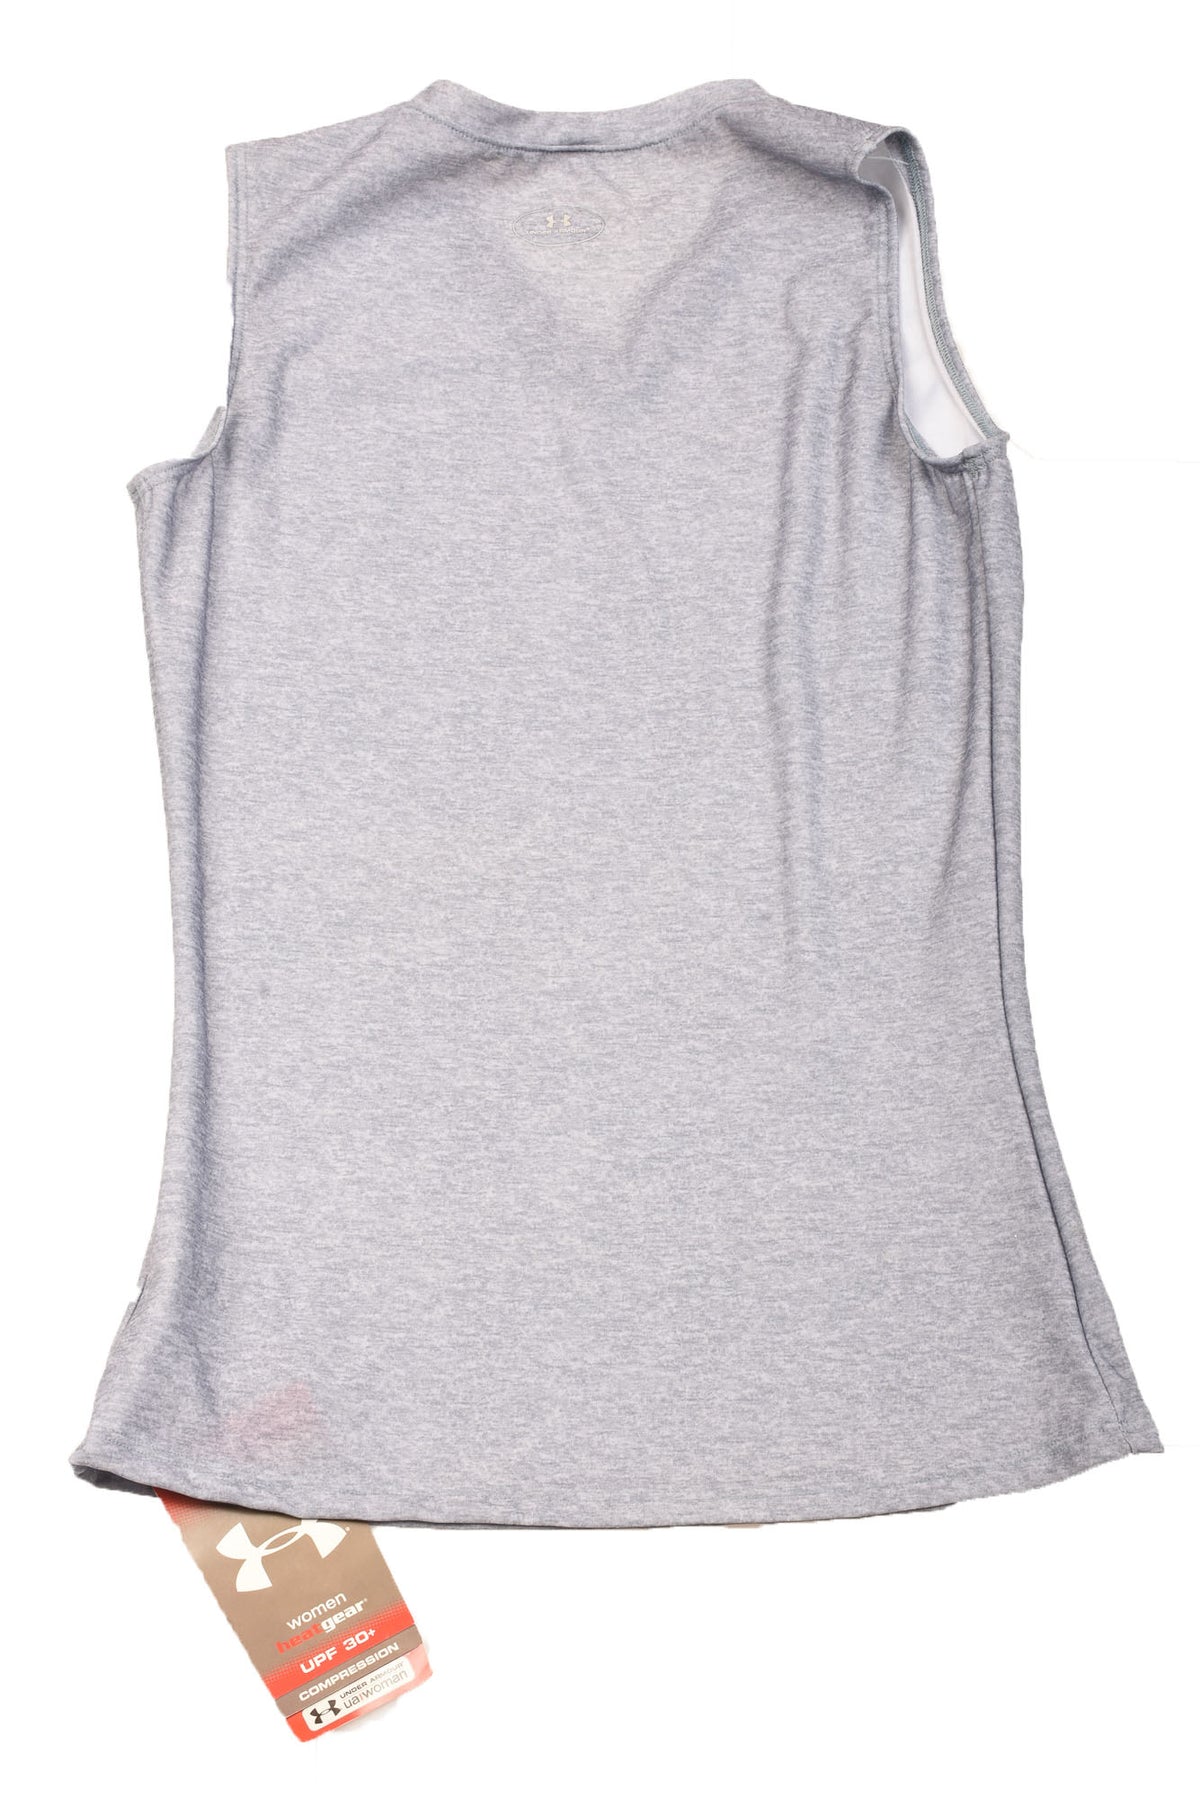 Under Armour Size Small Women's Activewear Top - Your Designer Thrift